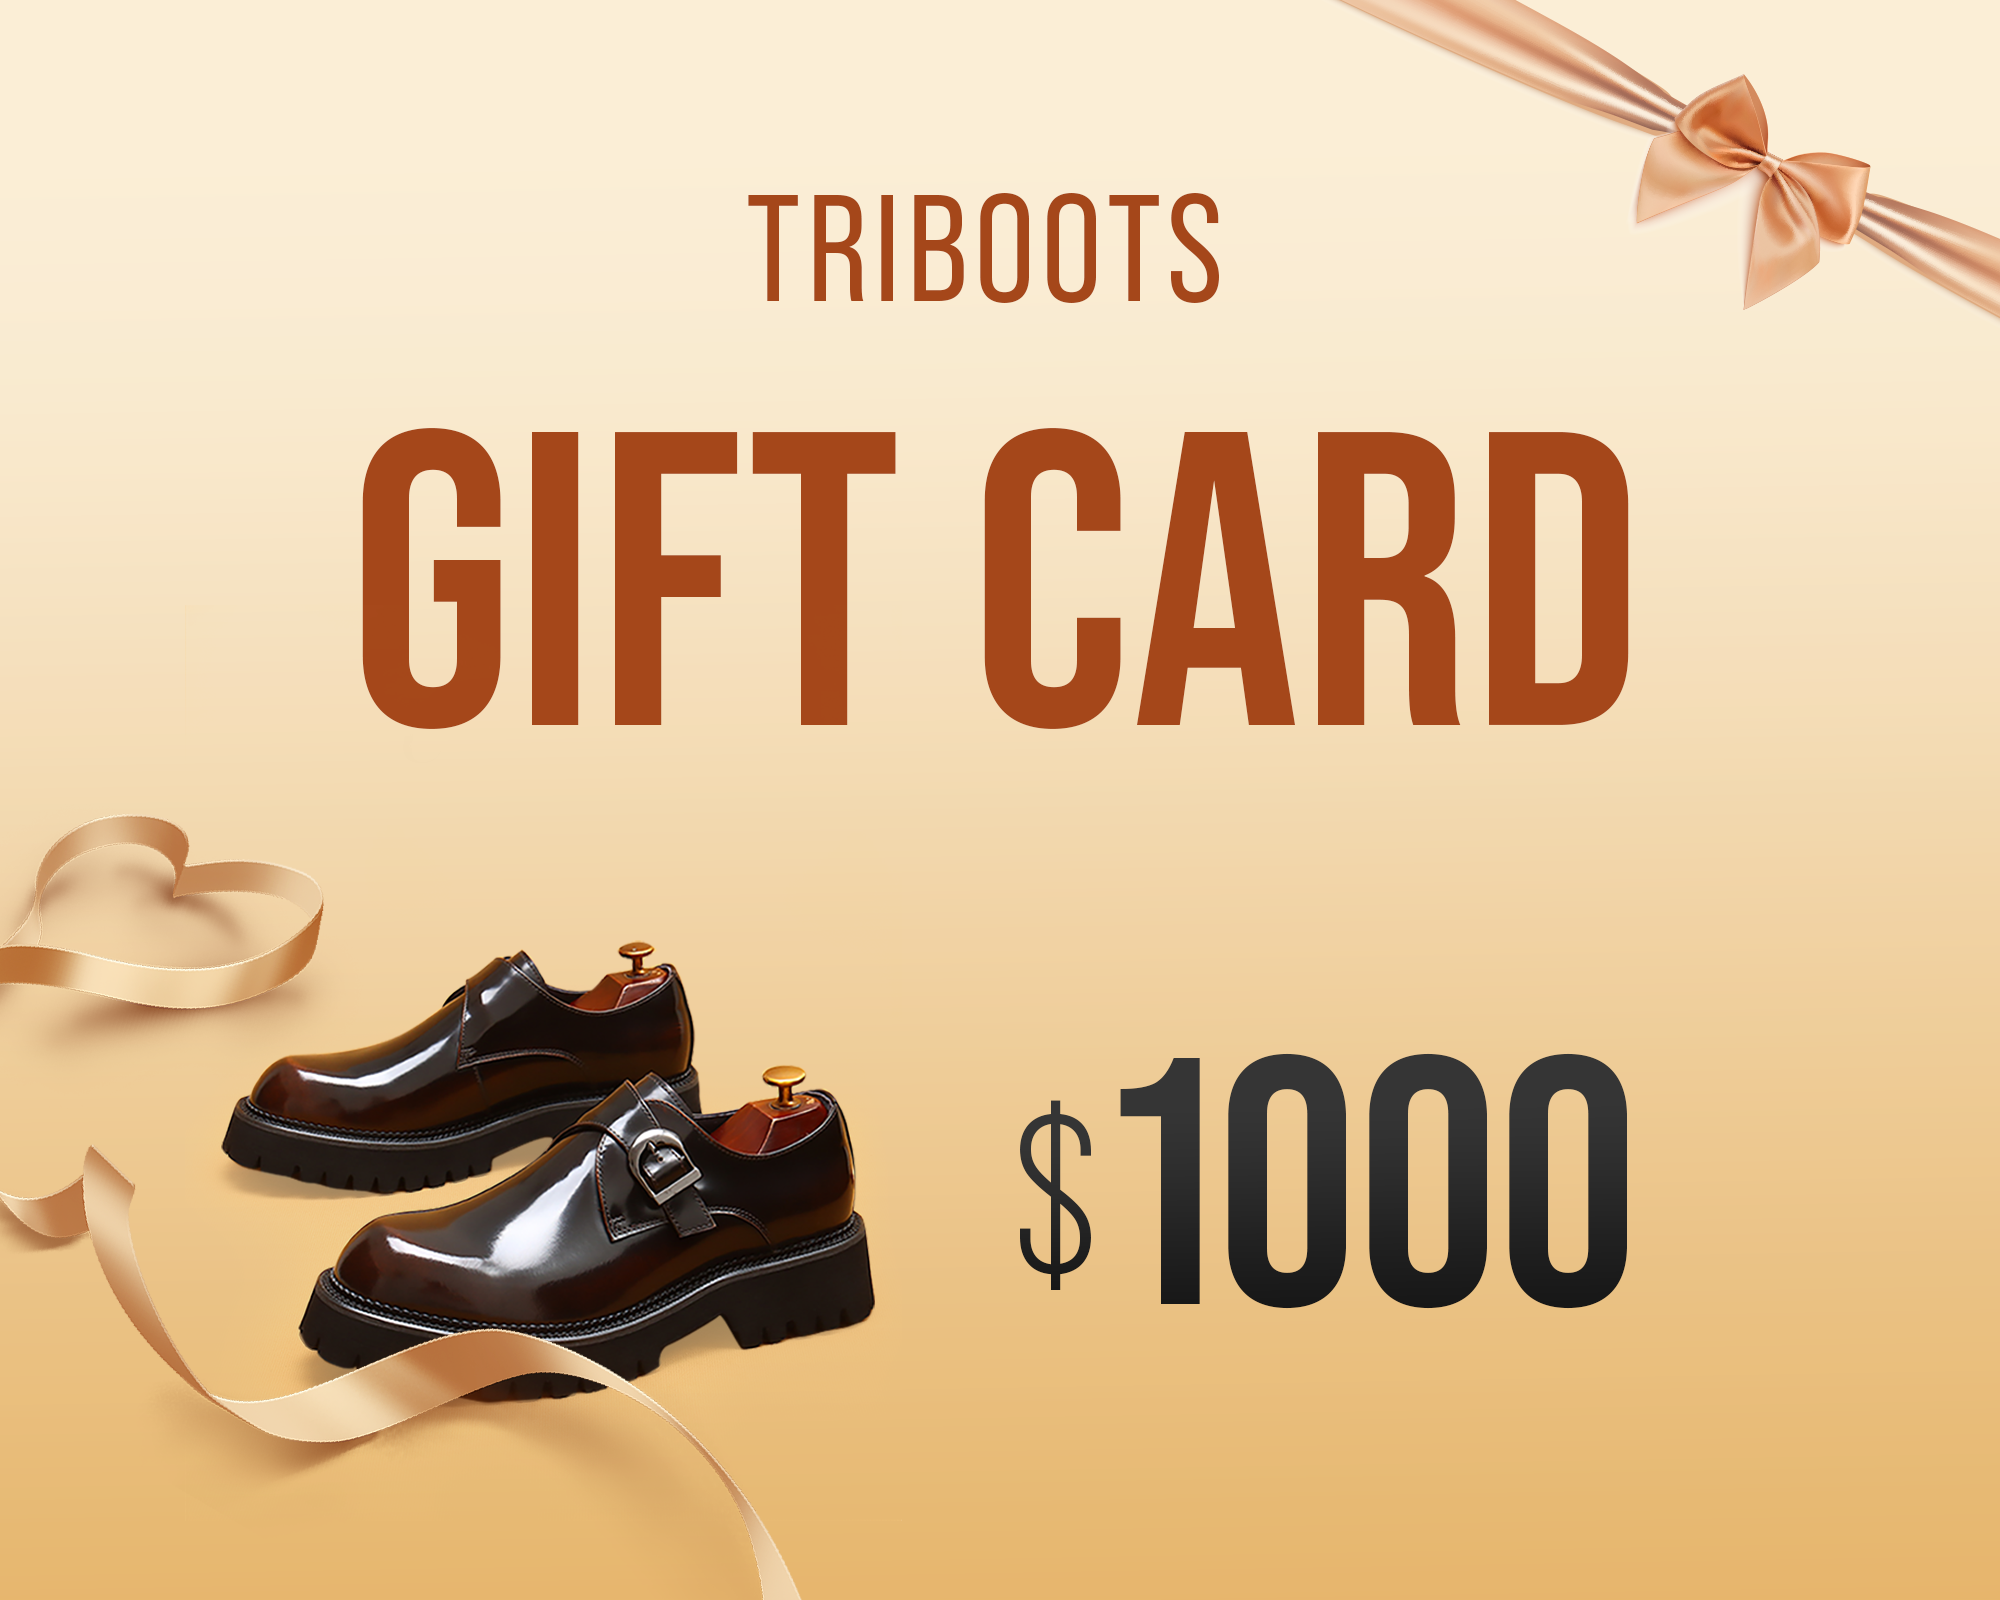 Assorted boots including fashion, vintage, and leather boots with Triboots Gift Card1